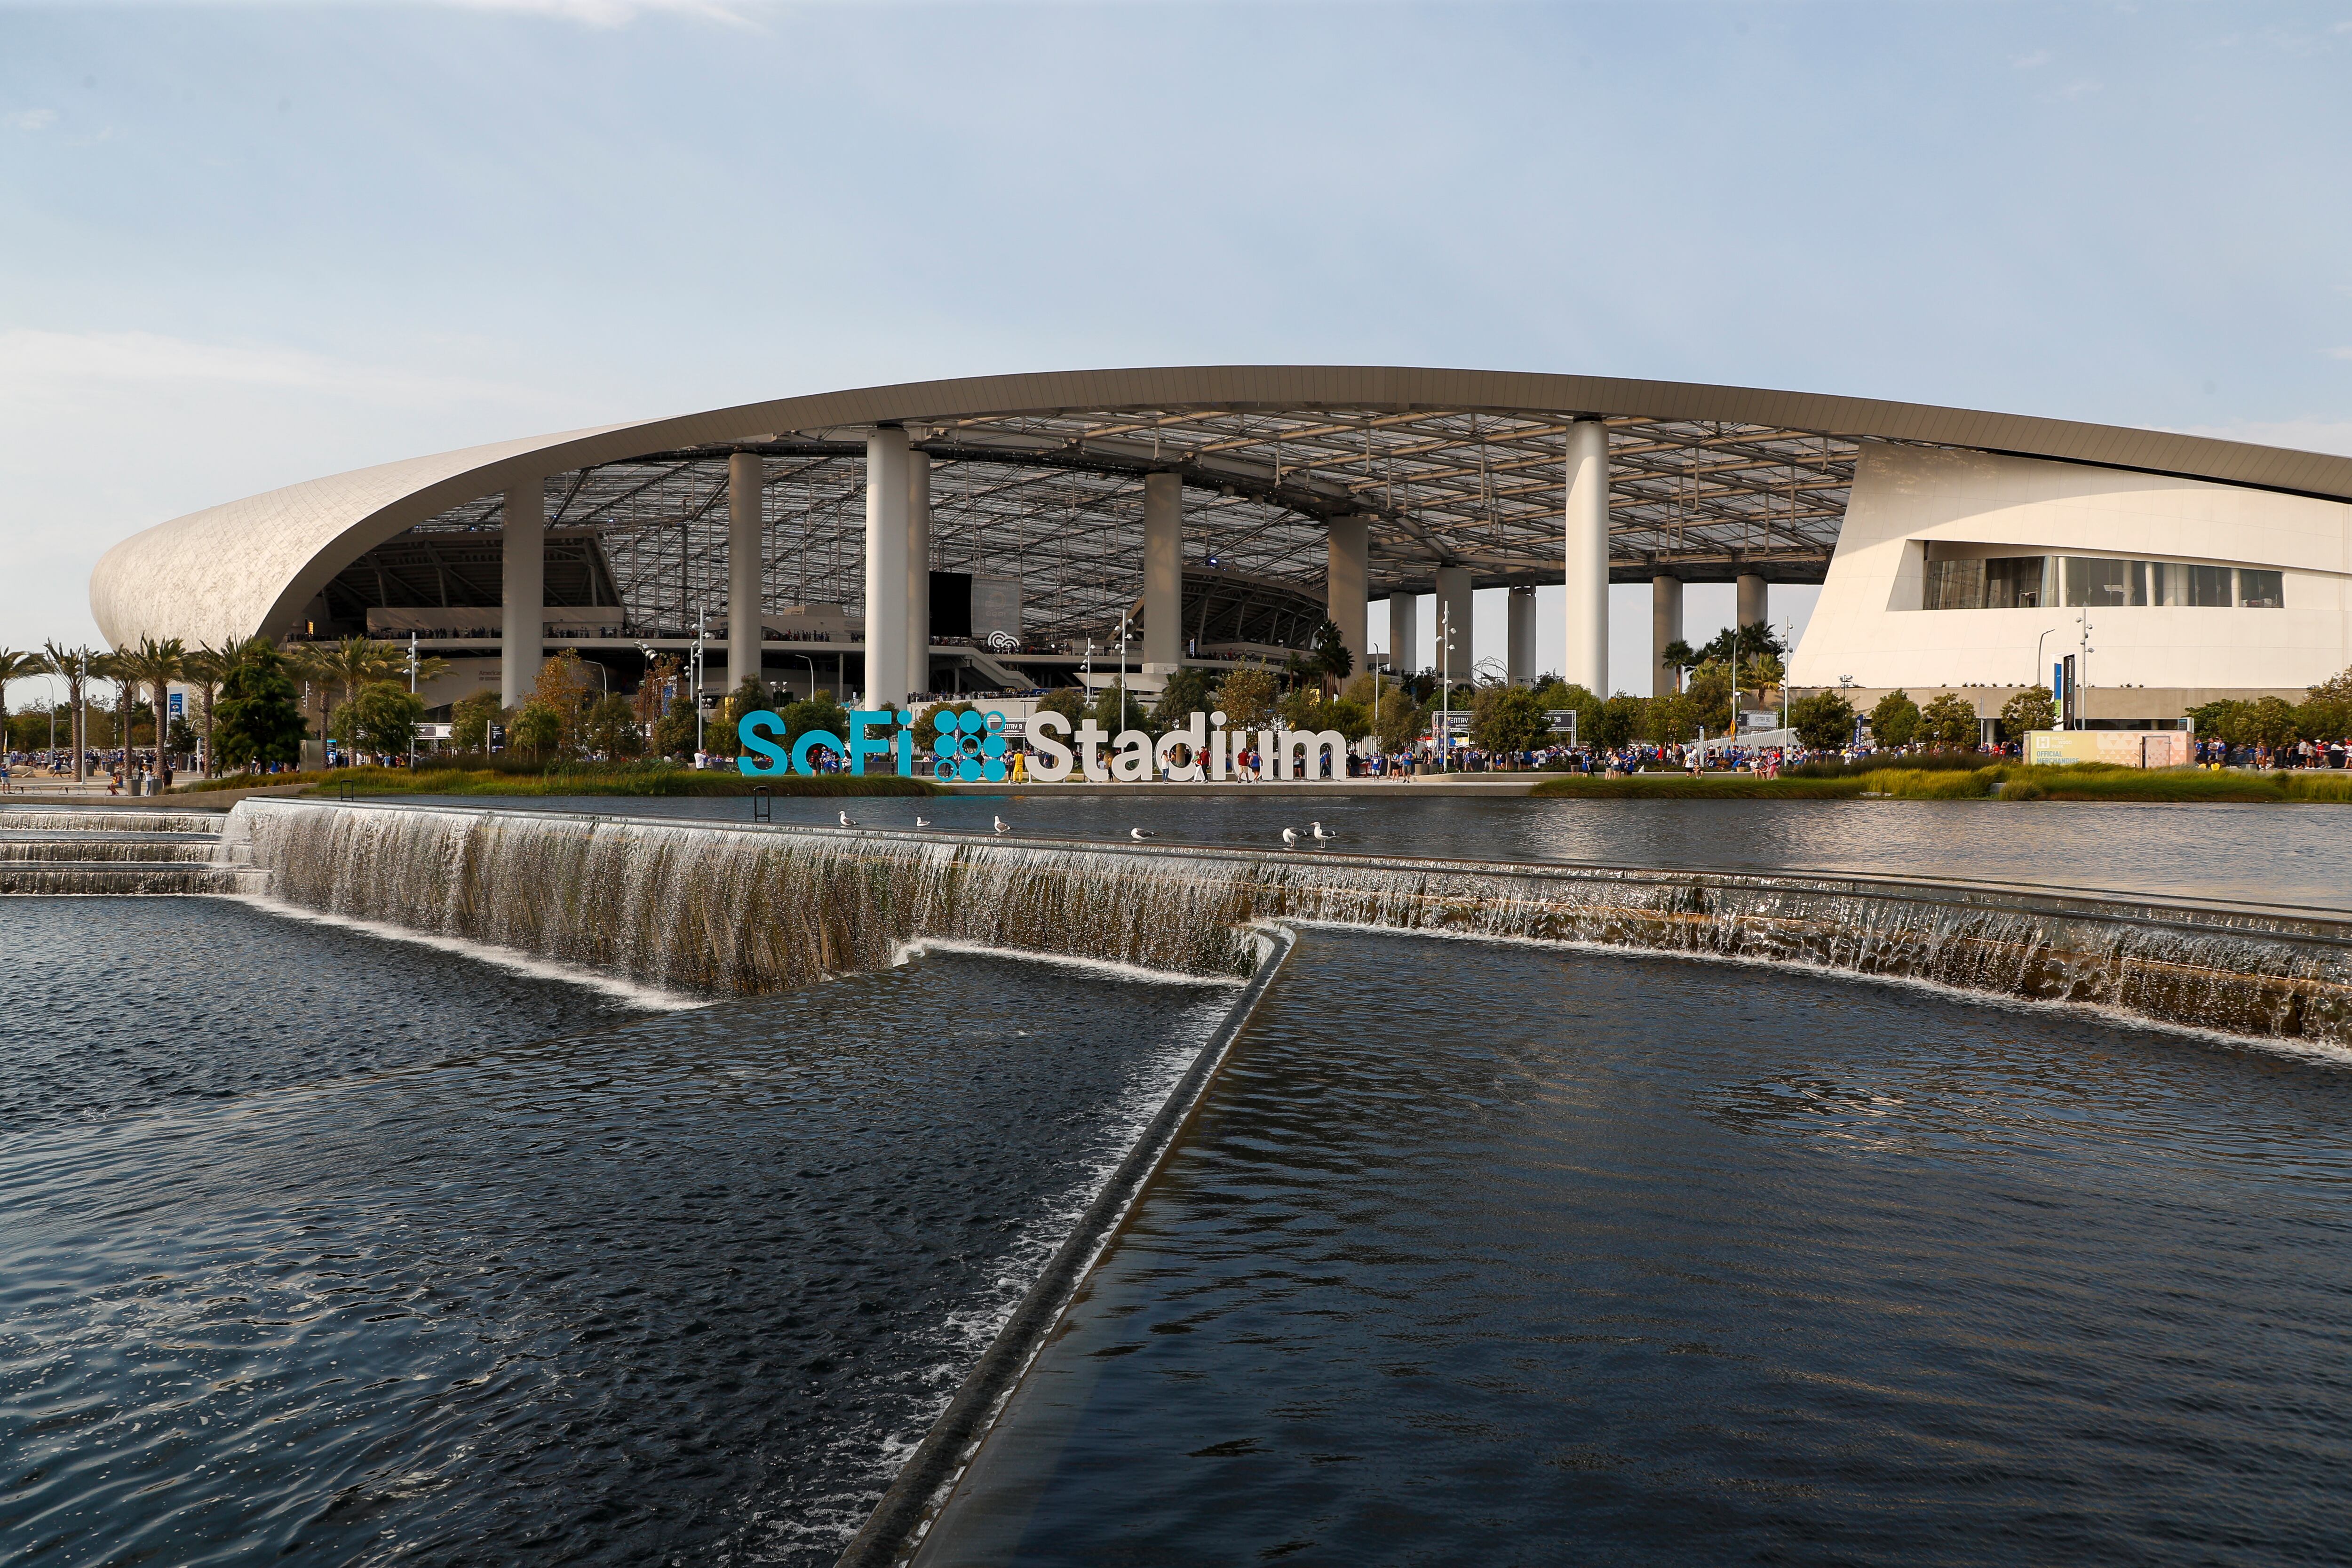 The exterior of SoFi Stadium in California, which seats more than 70,000 people.